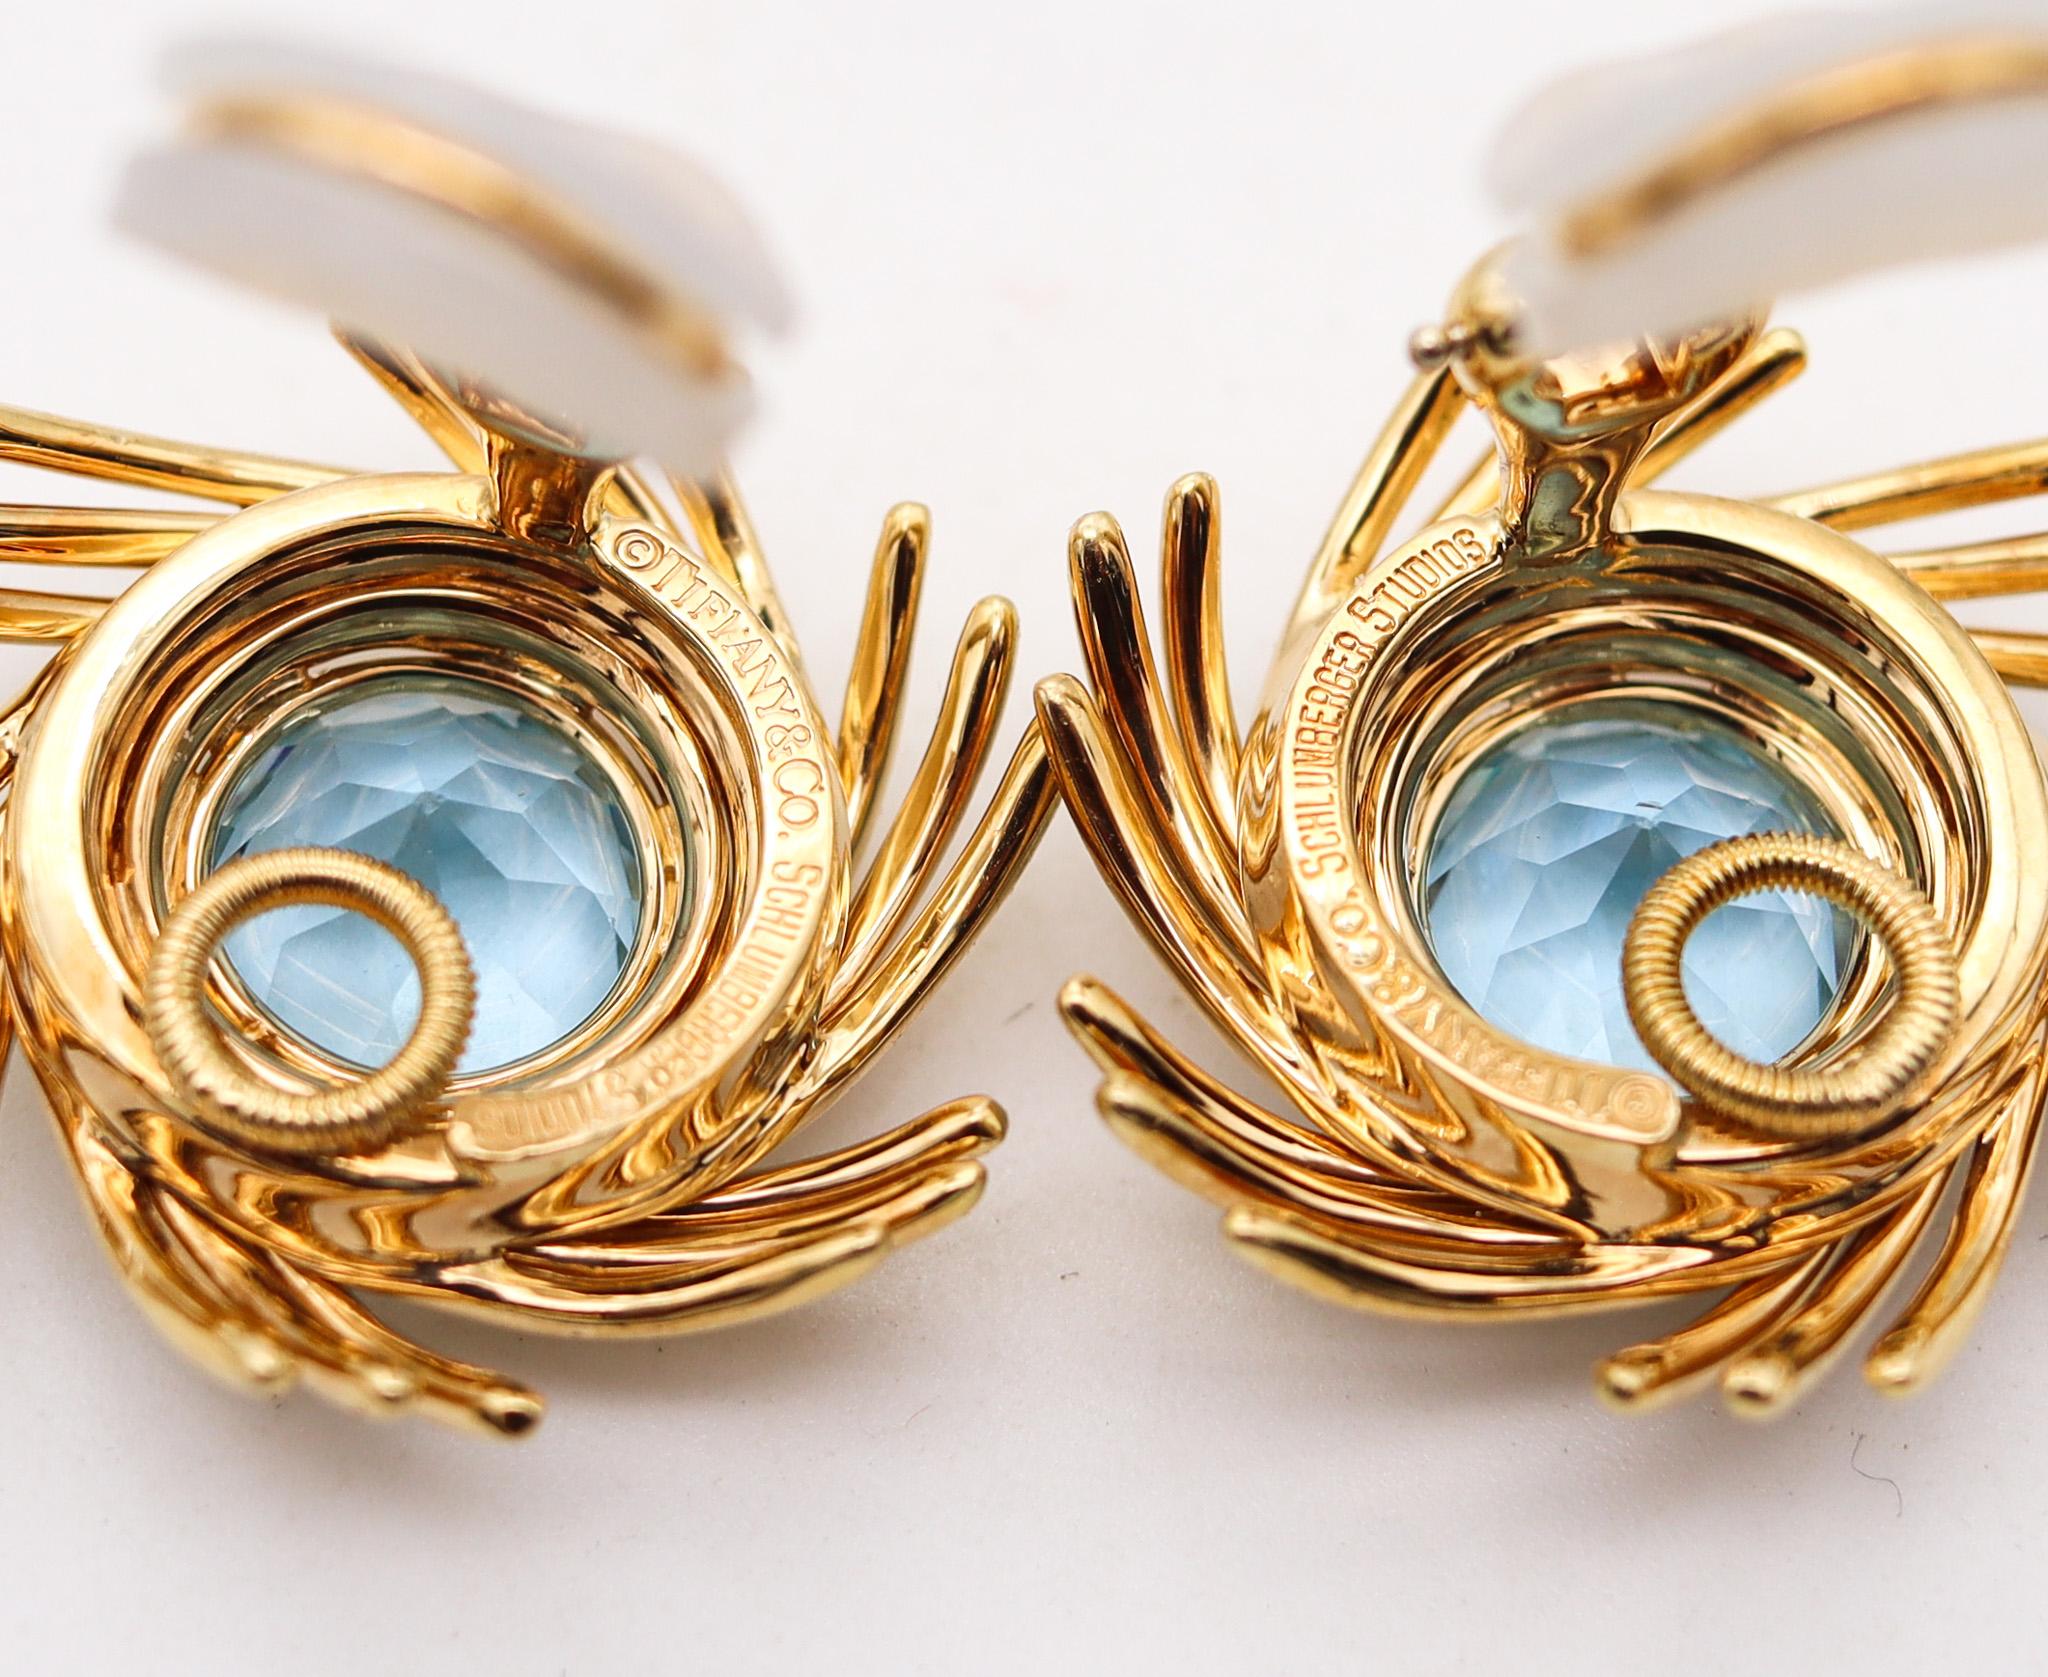 Modernist Tiffany & Co 1970 Jean Schlumberger Earrings In 18Kt Gold With 16 Ctw Aquamarine